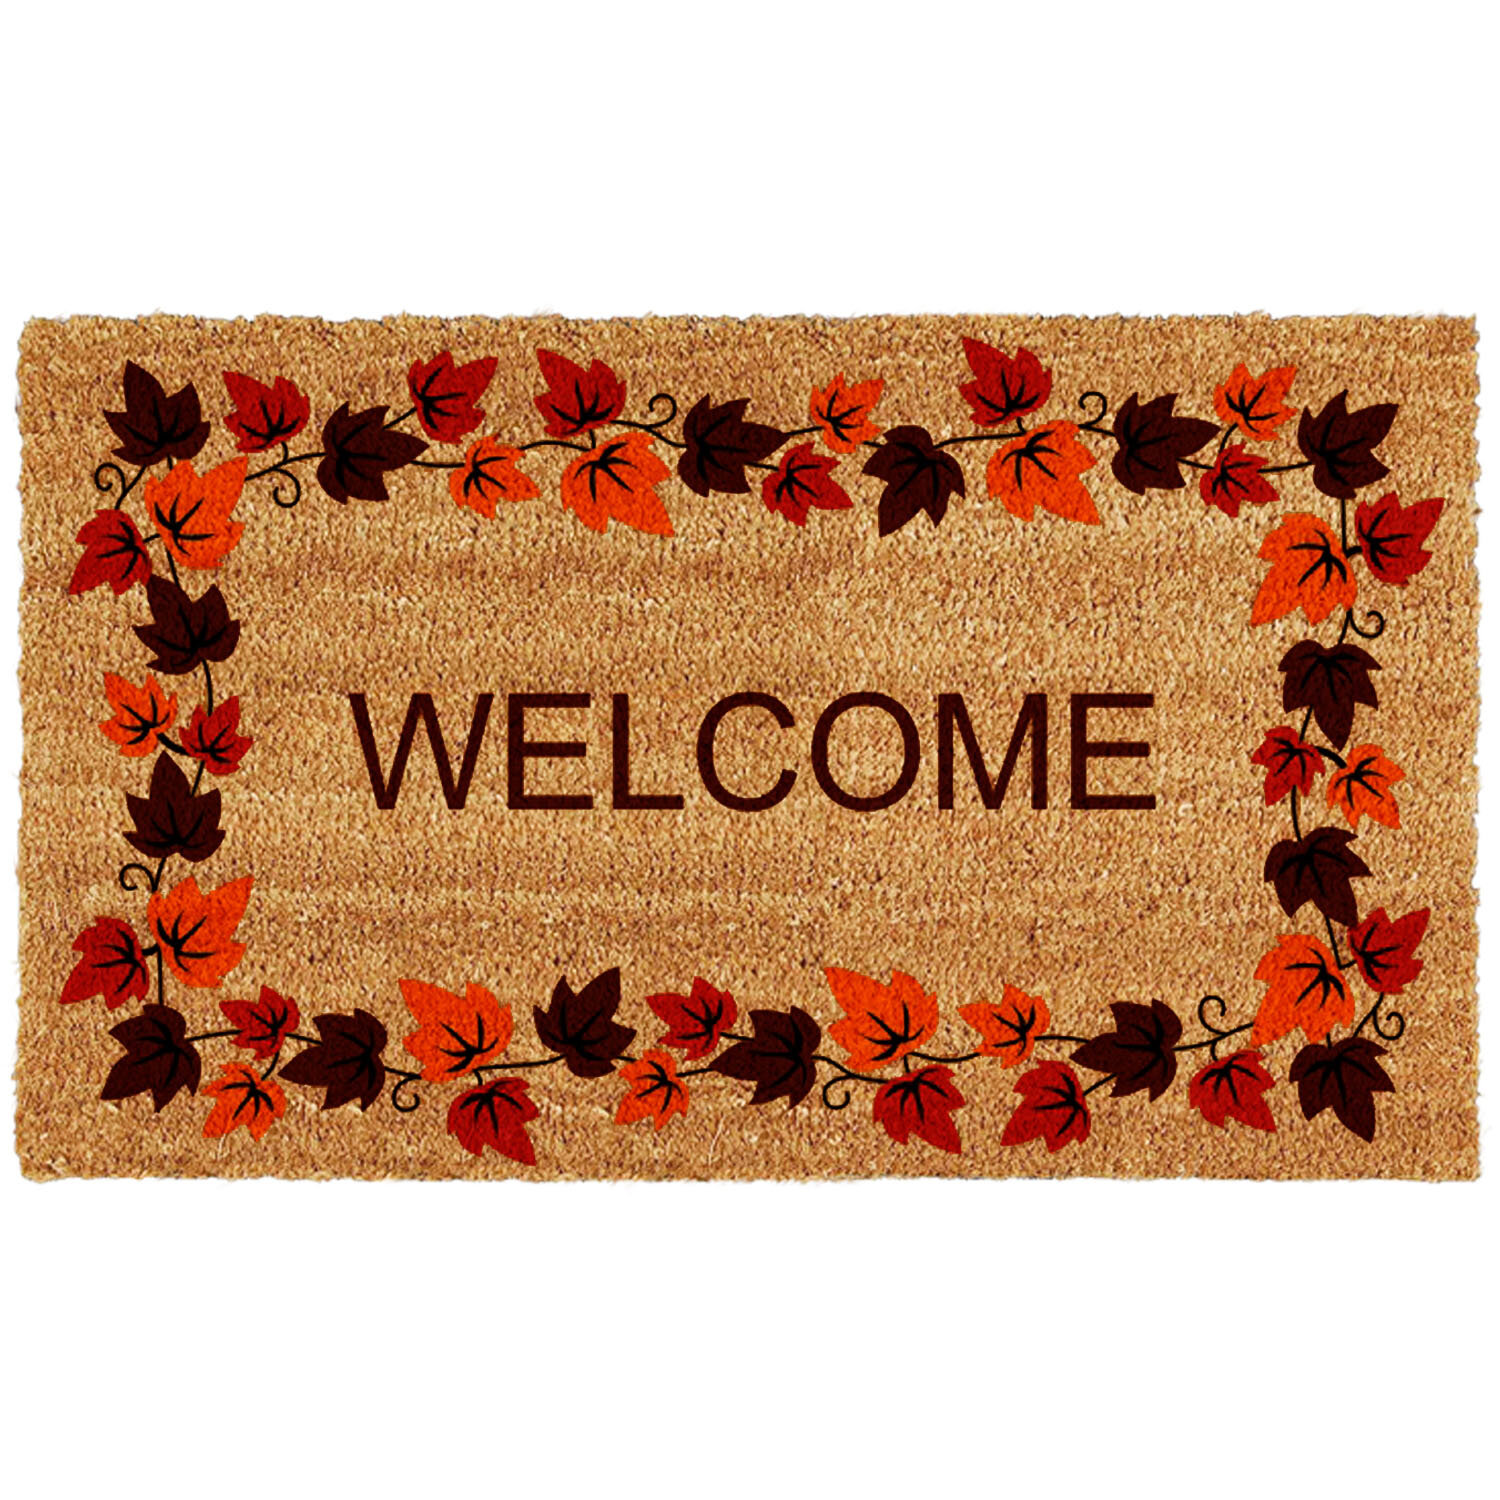 Colorful Sunflowers Fall Doormat Welcome Autumn Floral Indoor Outdoor 18" x 30" 